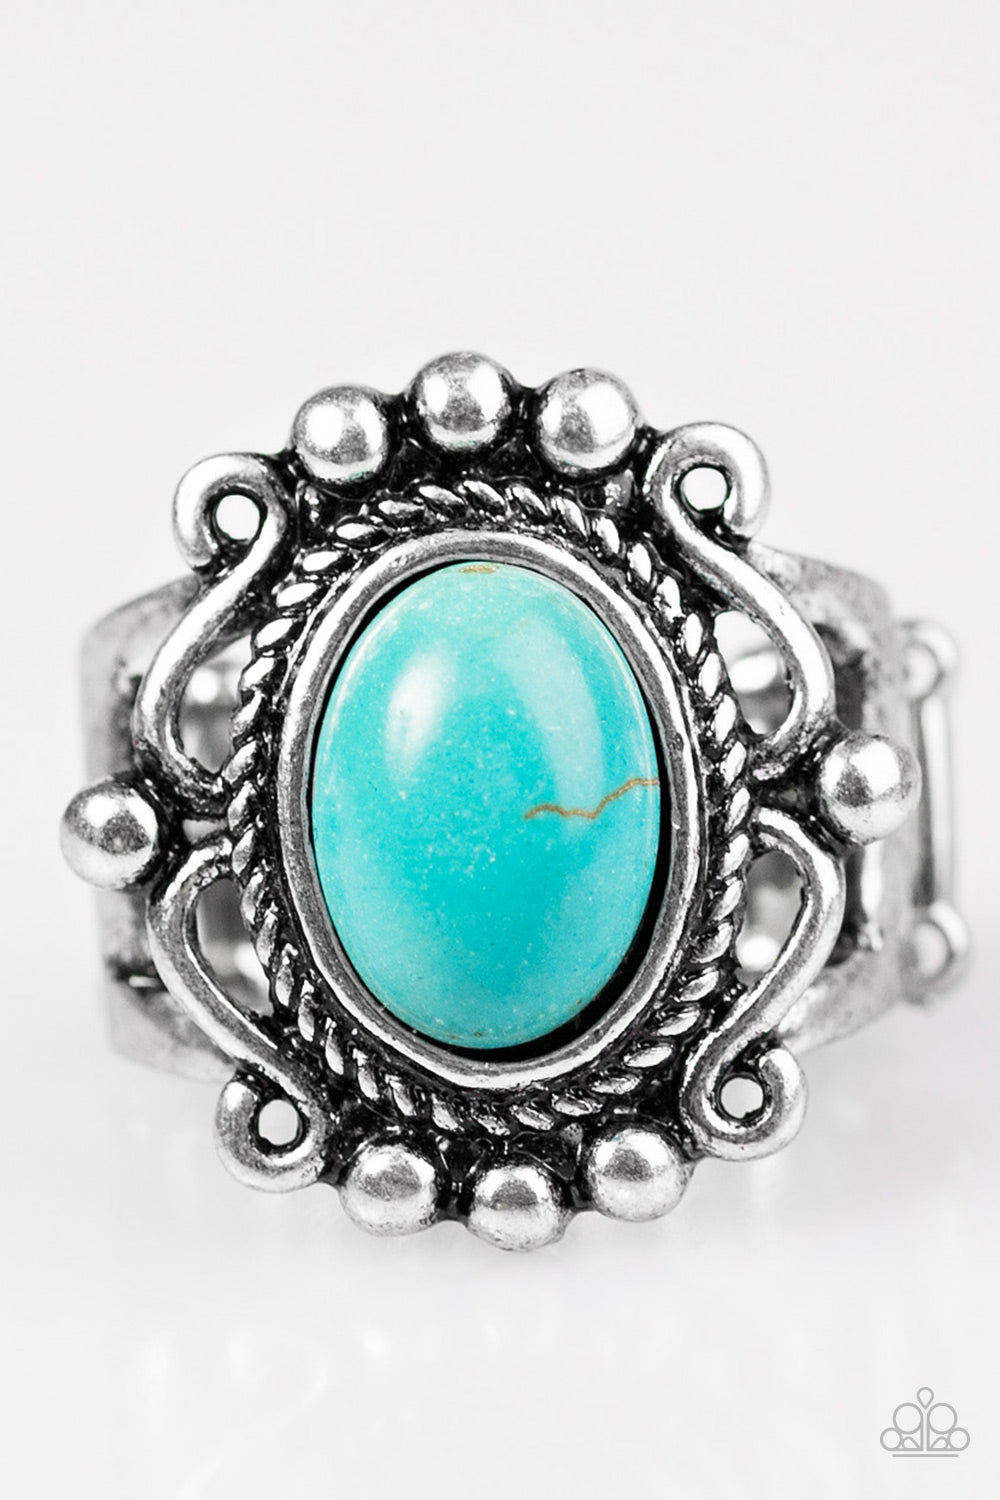 DREAMY DESERTS - BLUE OVAL TURQUOISE RING